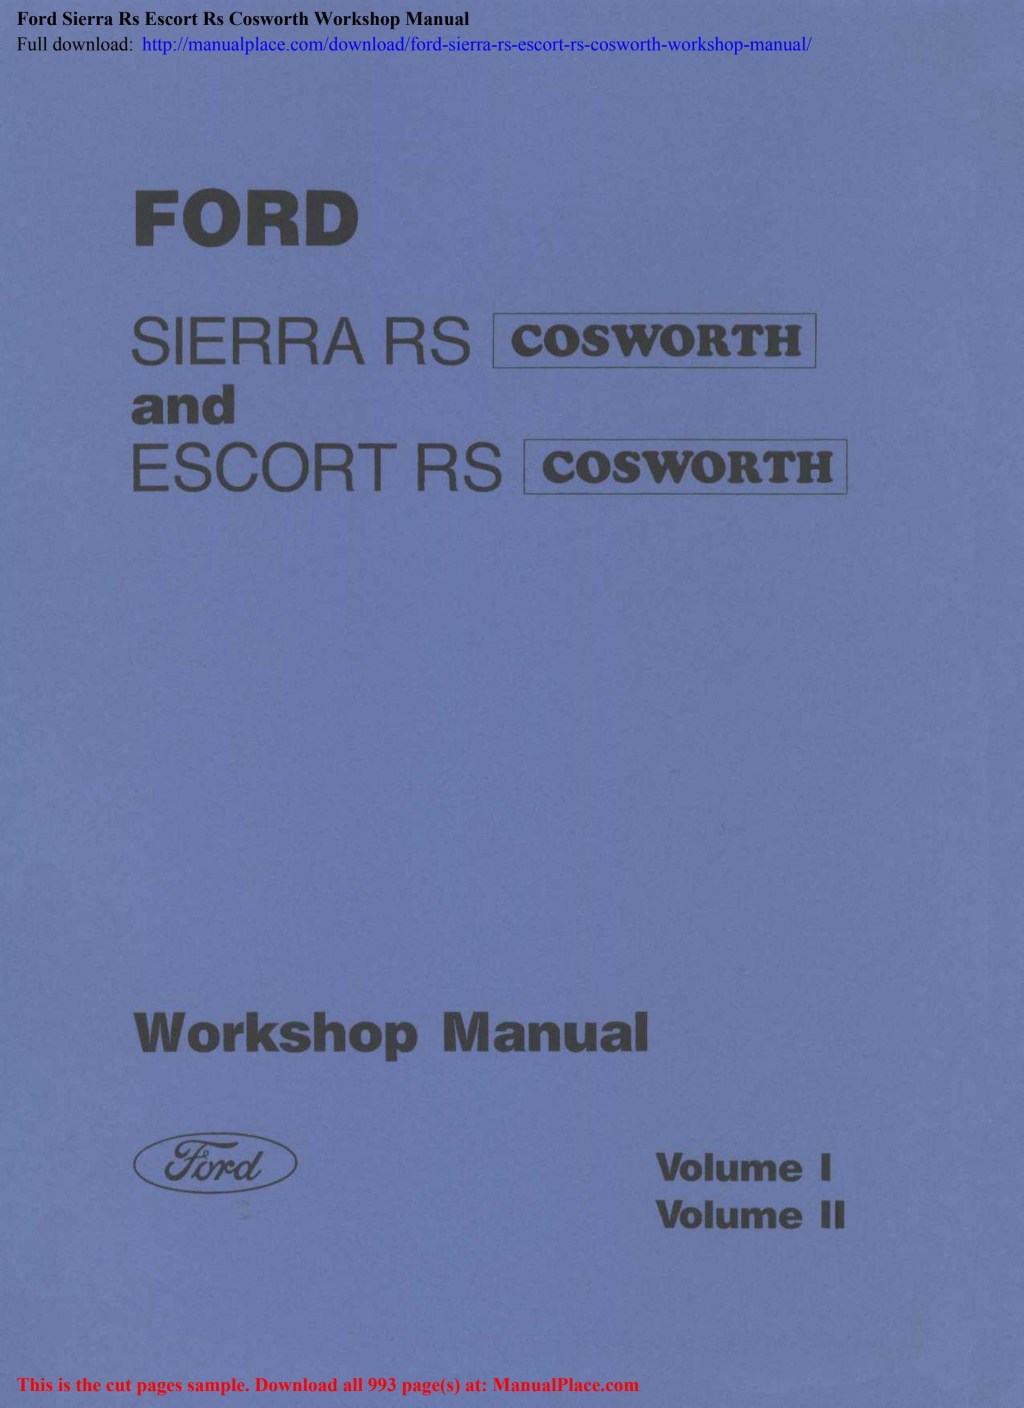 Picture of: Ford Sierra Rs Escort Rs Cosworth Workshop Manual by RobertCheryh